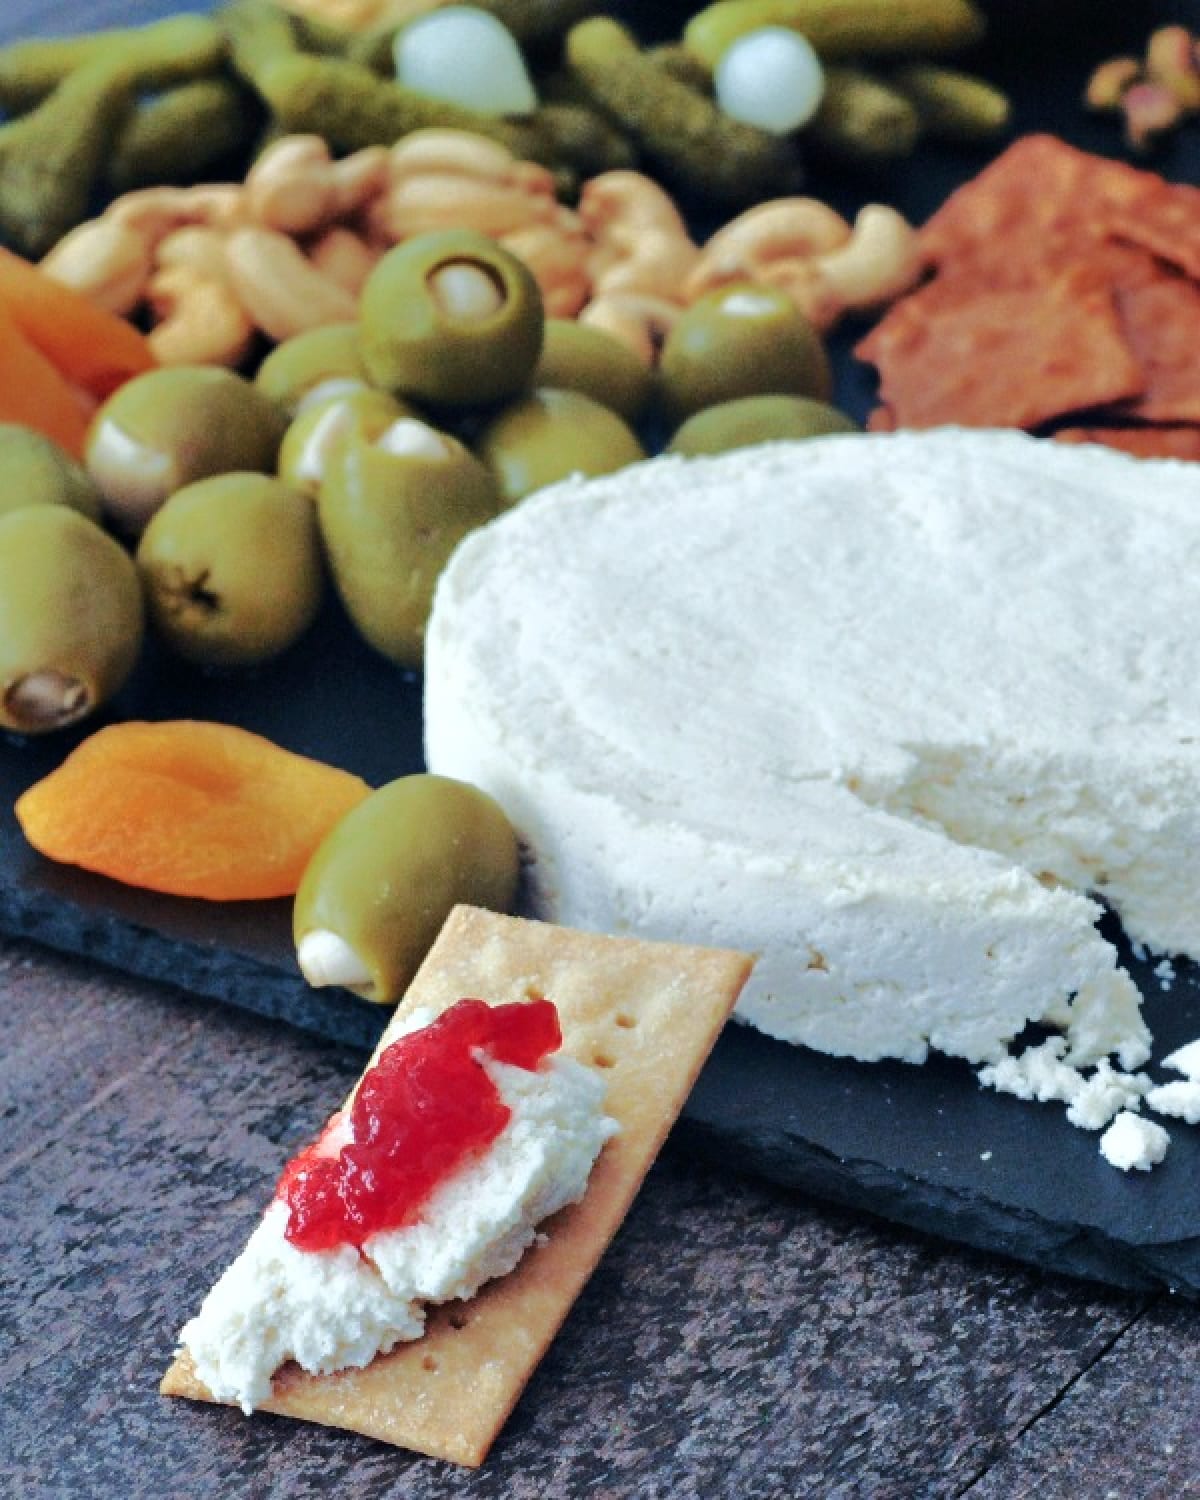 A wheel of vegan brie cheese on a slate board with crackers, olives, nuts, and veggies. A cracker spread with vegan brie and bright red fruit jam sits in front of the cheese board.